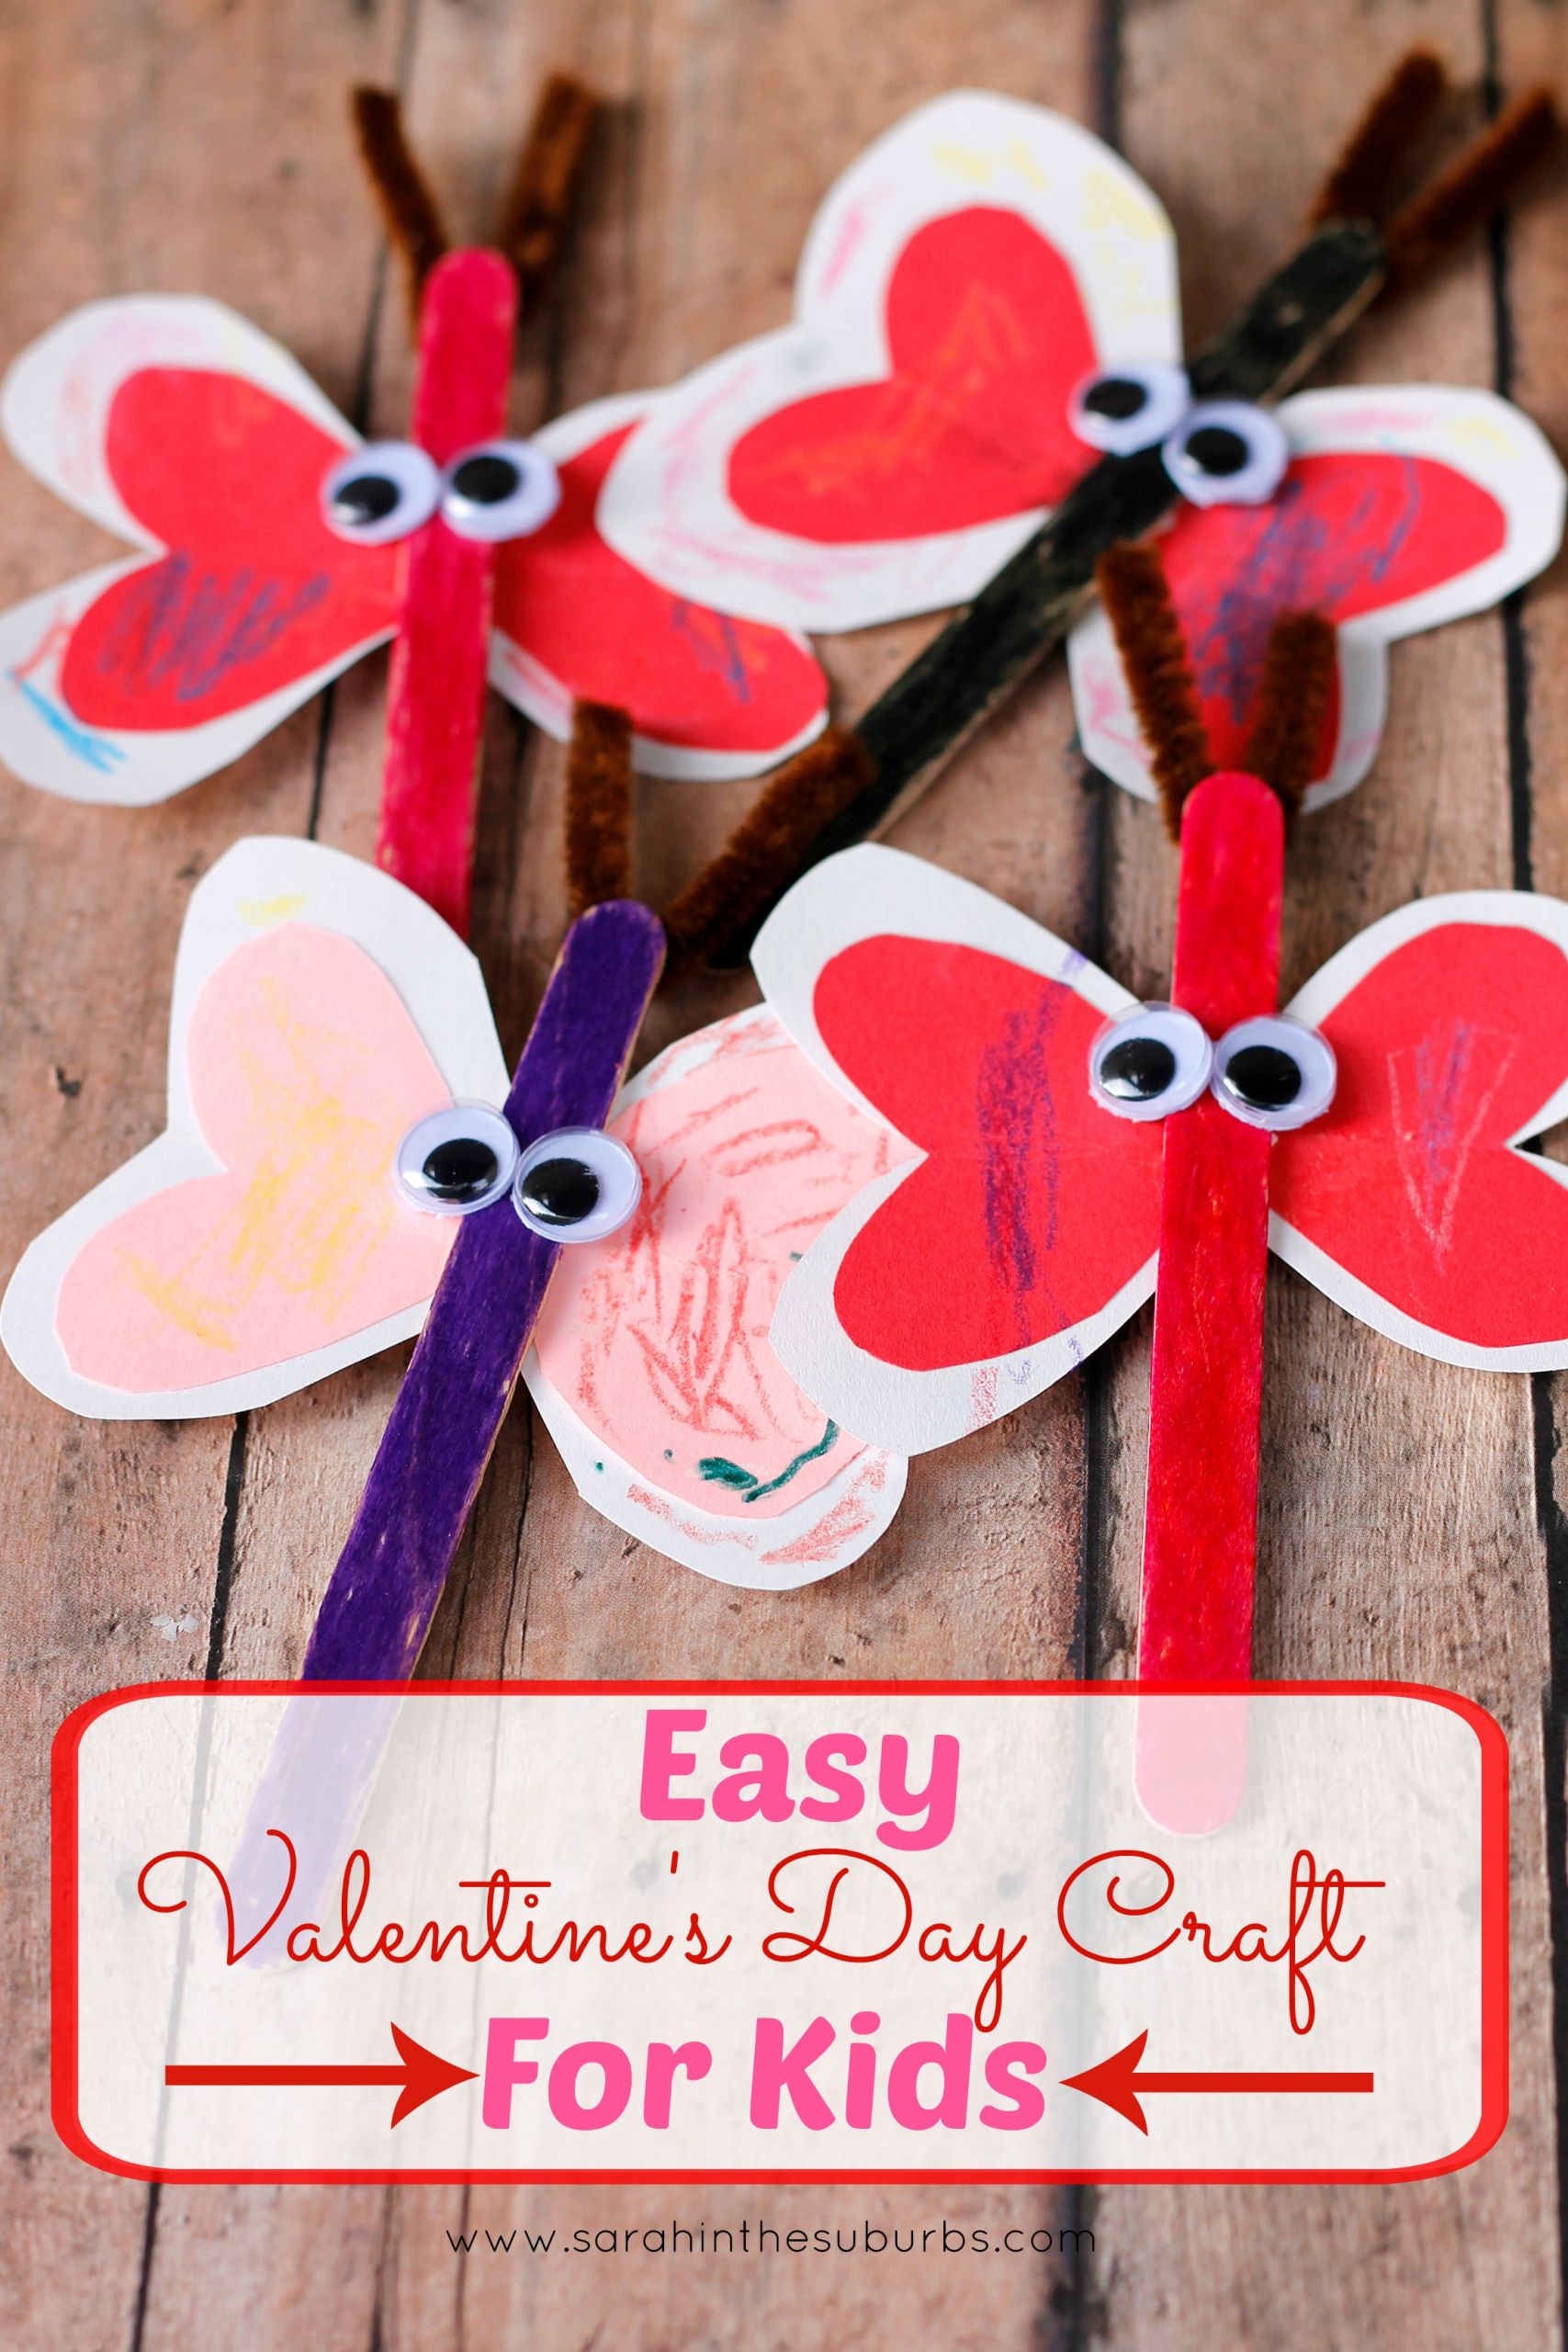 Valentines Day Craft Ideas For Preschoolers
 Easy Valentine s Day Craft for Kids Sarah in the Suburbs